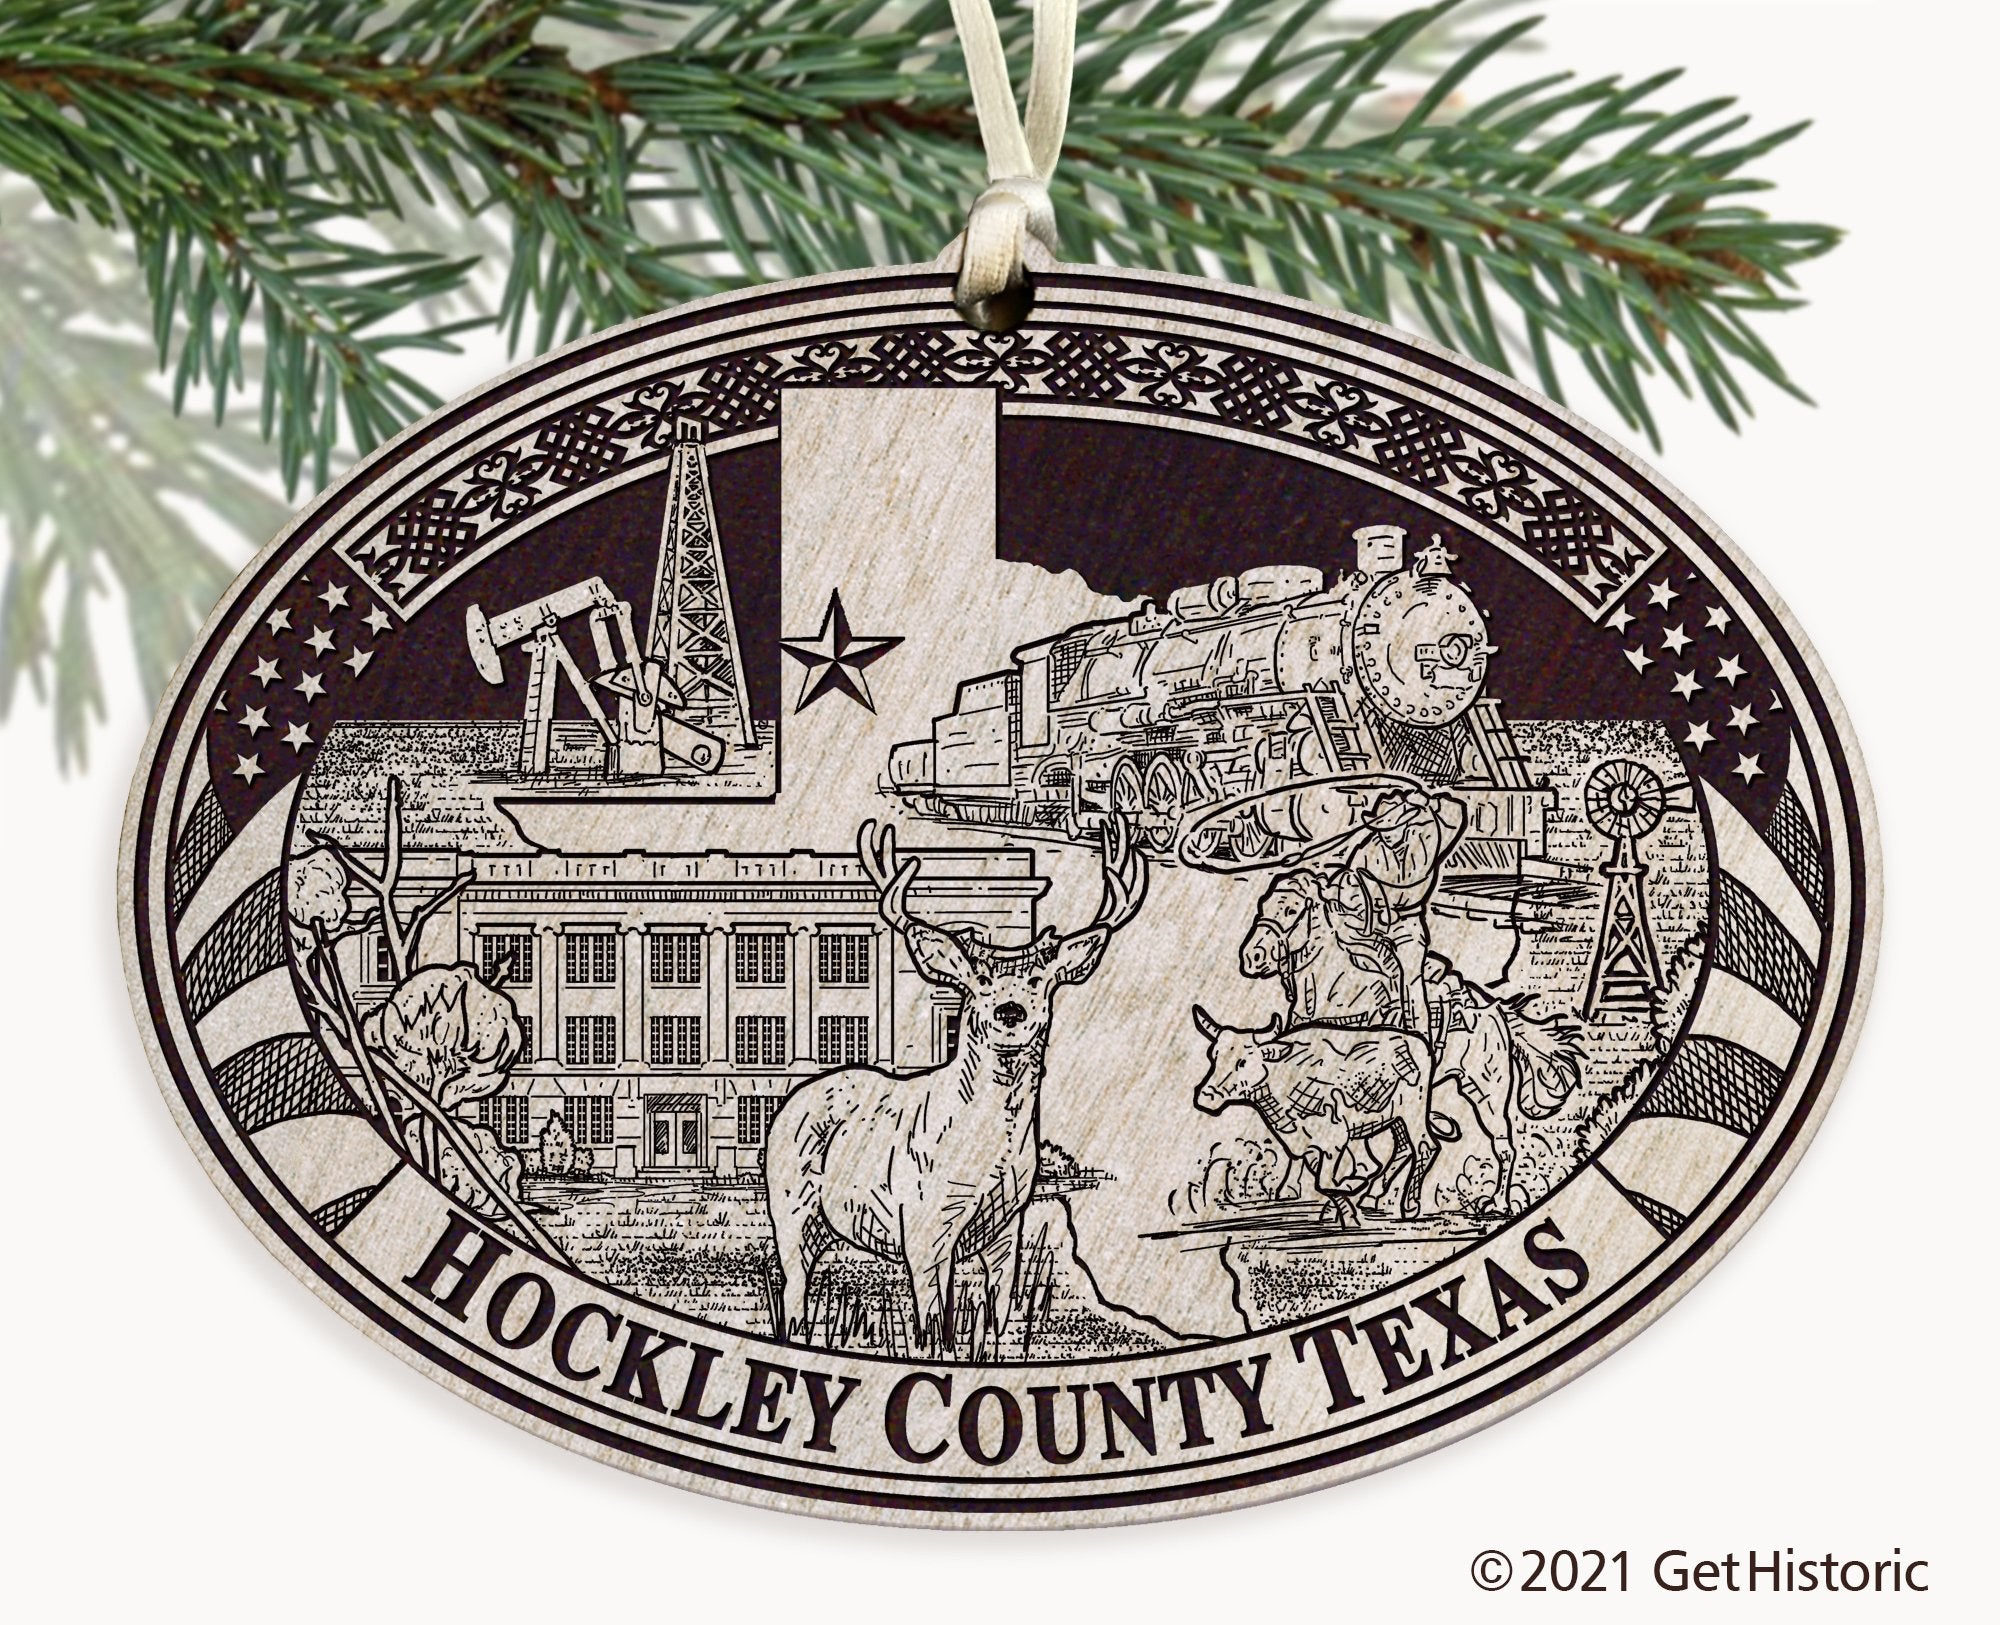 Hockley County Texas Engraved Ornament